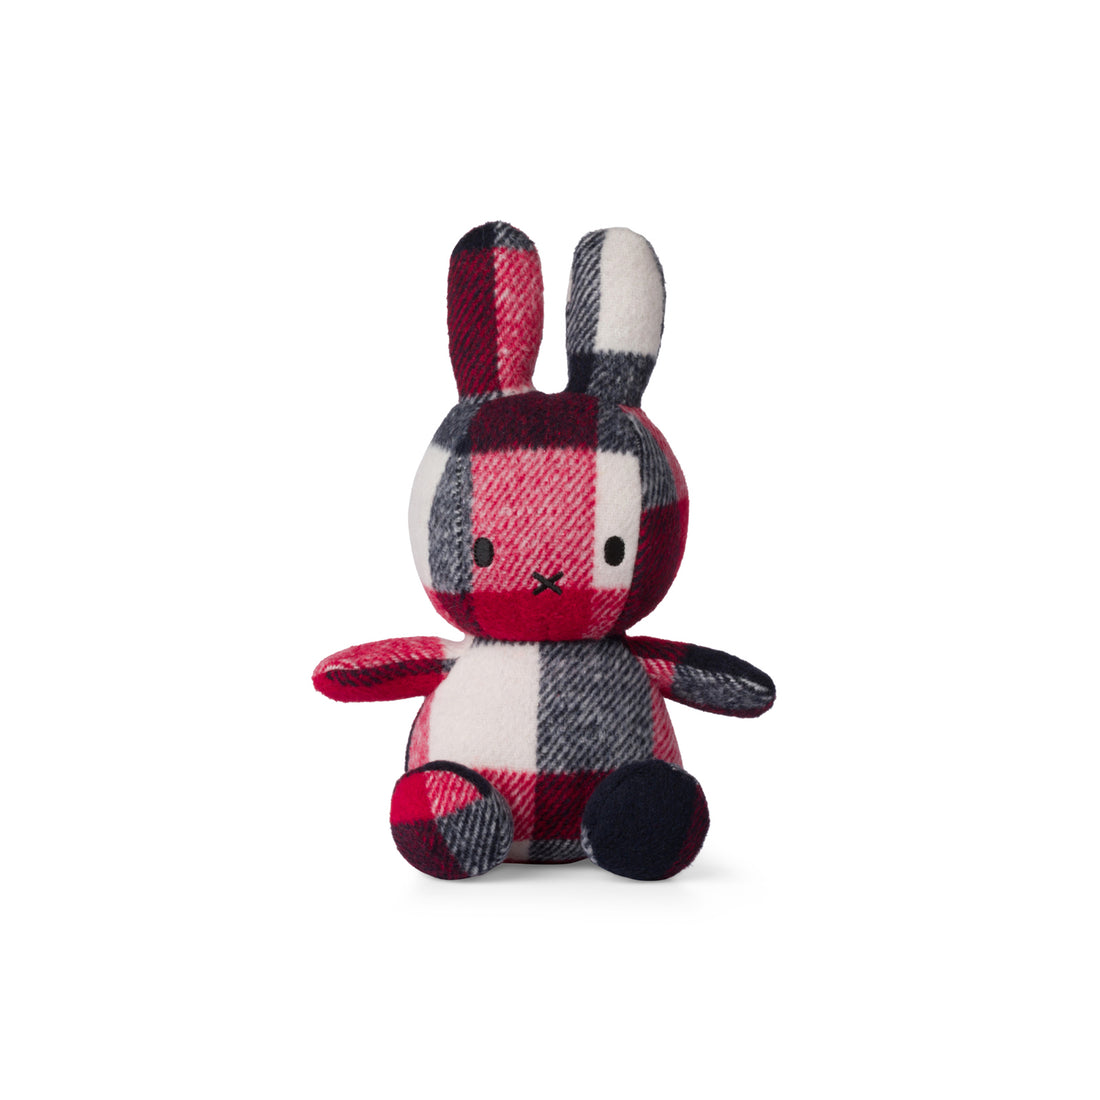 miffy-sitting-check-red-blue-23cm-miff-24182373- (1)